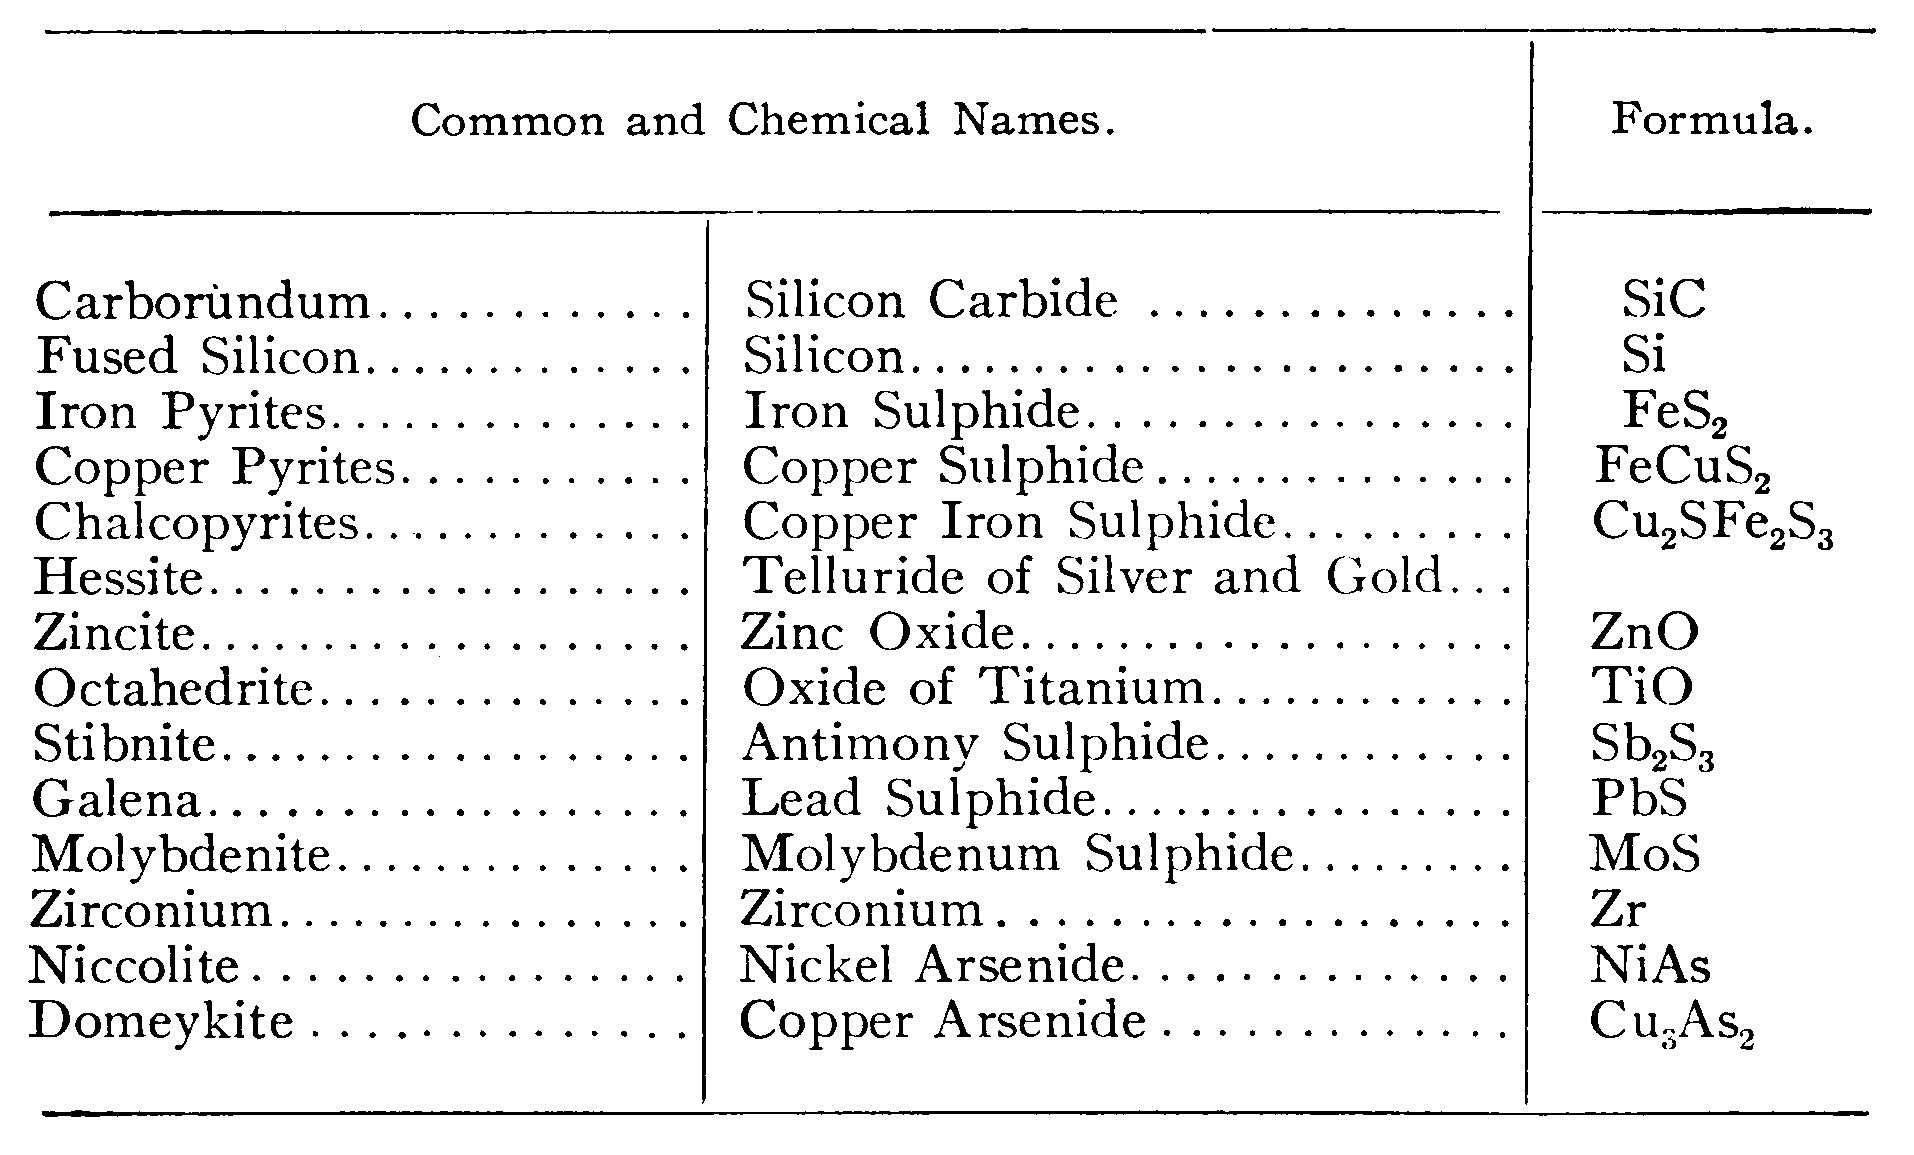 Common and Chemical Names.